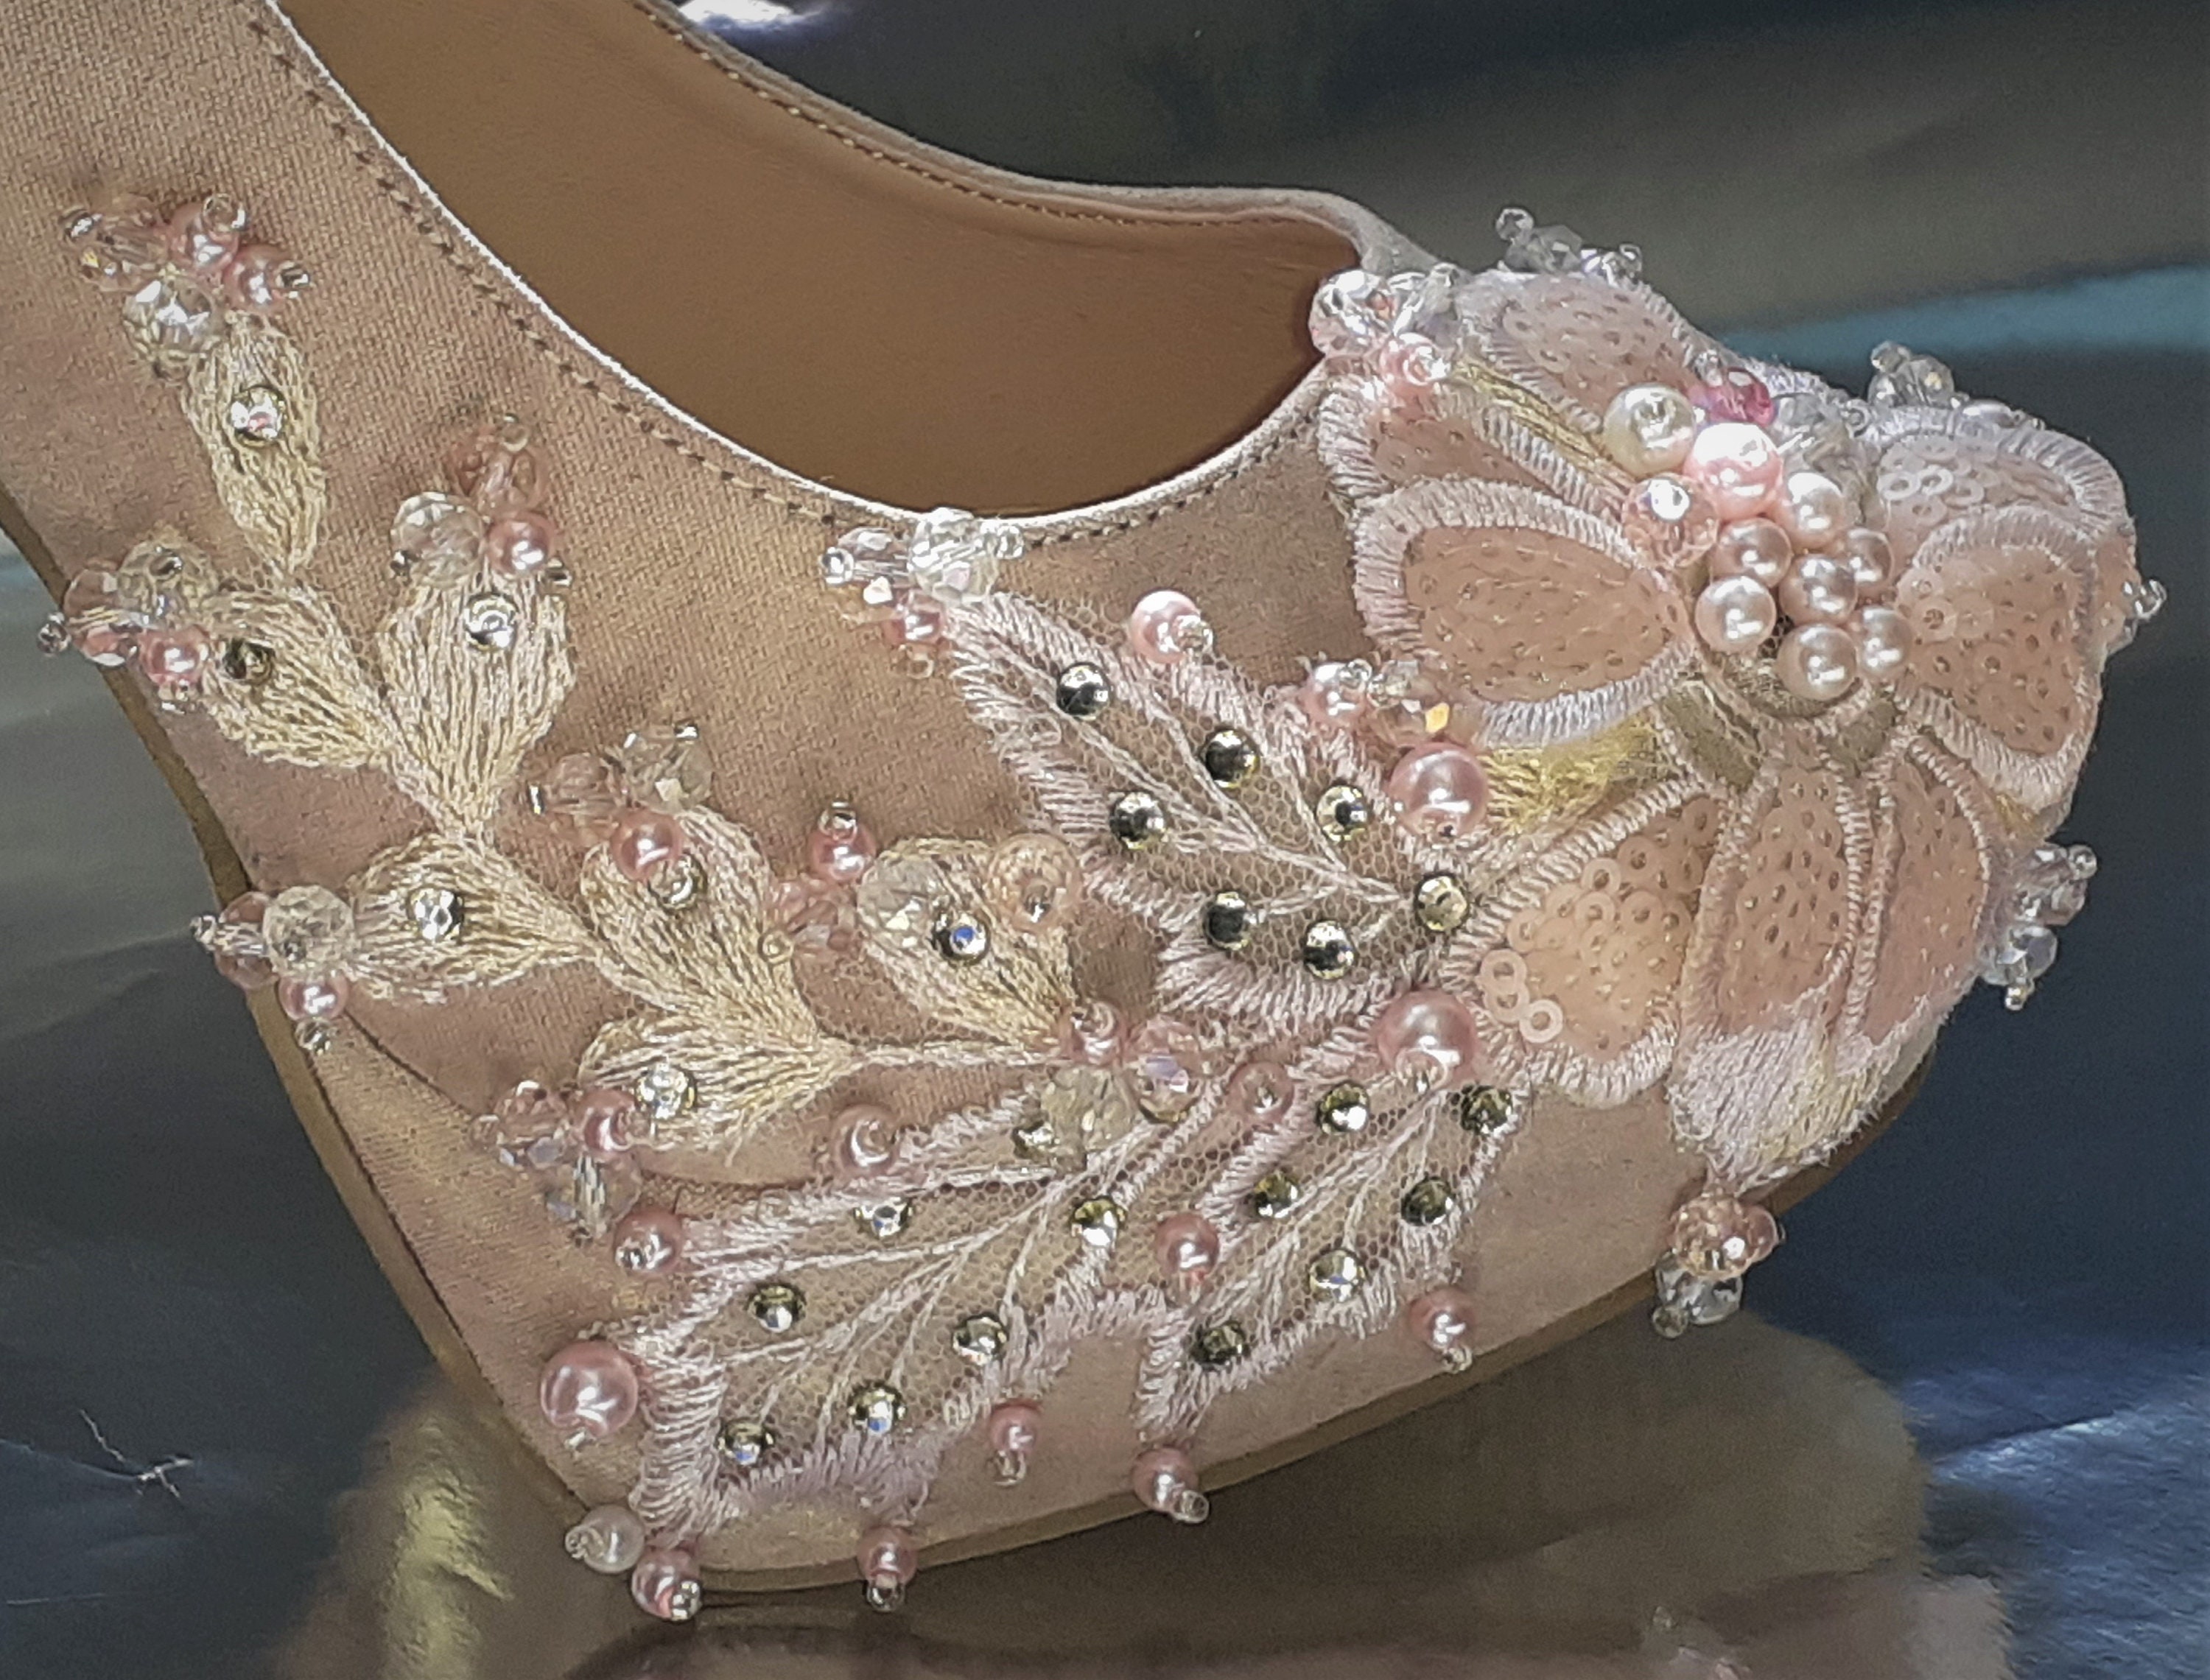 Unique Customised Women's Occasion / Wedding Shoes Nude -  Israel